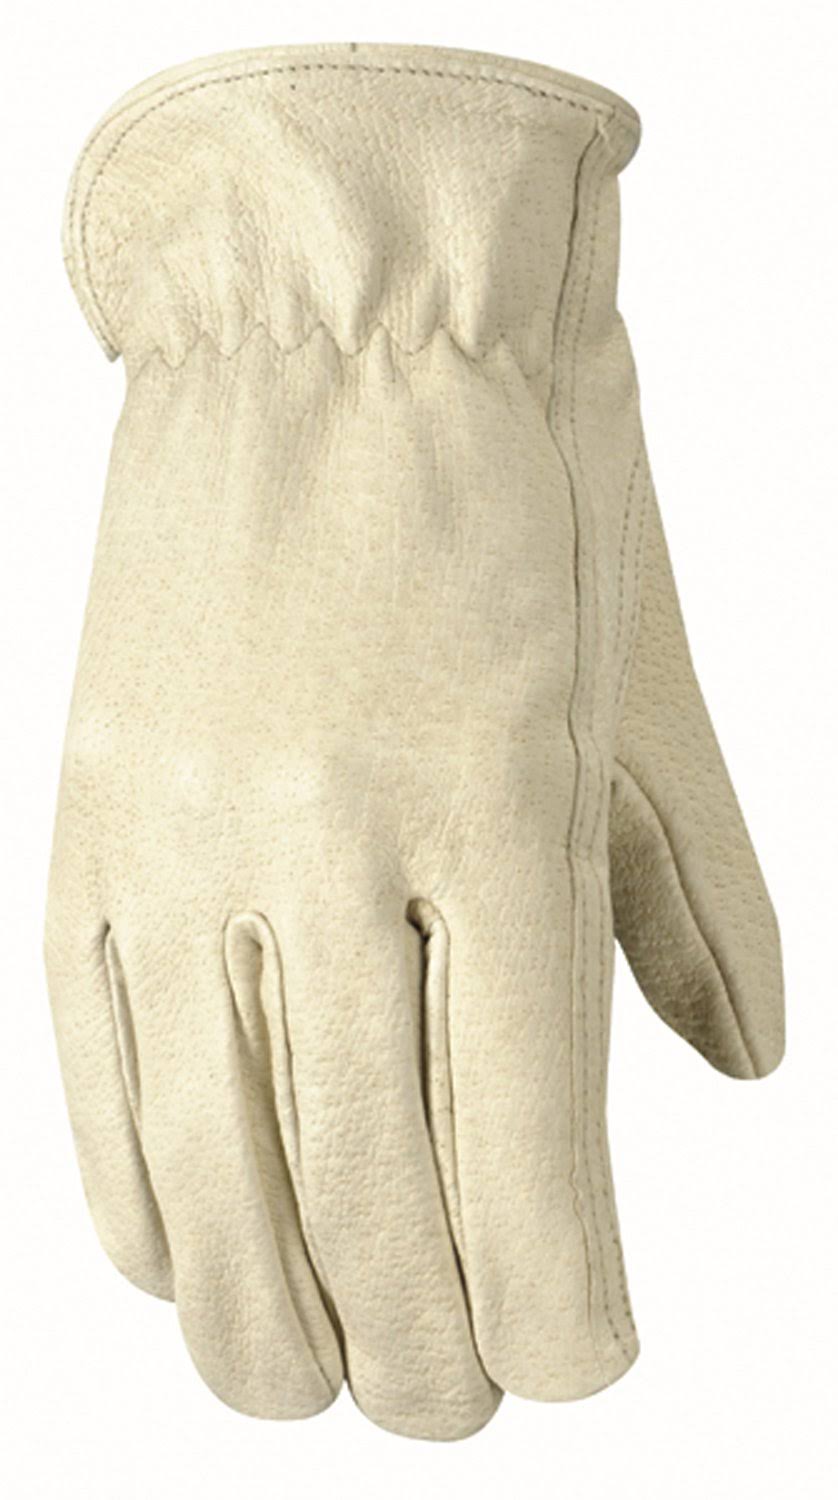 Wells Lamont Grain Leather Work Gloves - X-Large